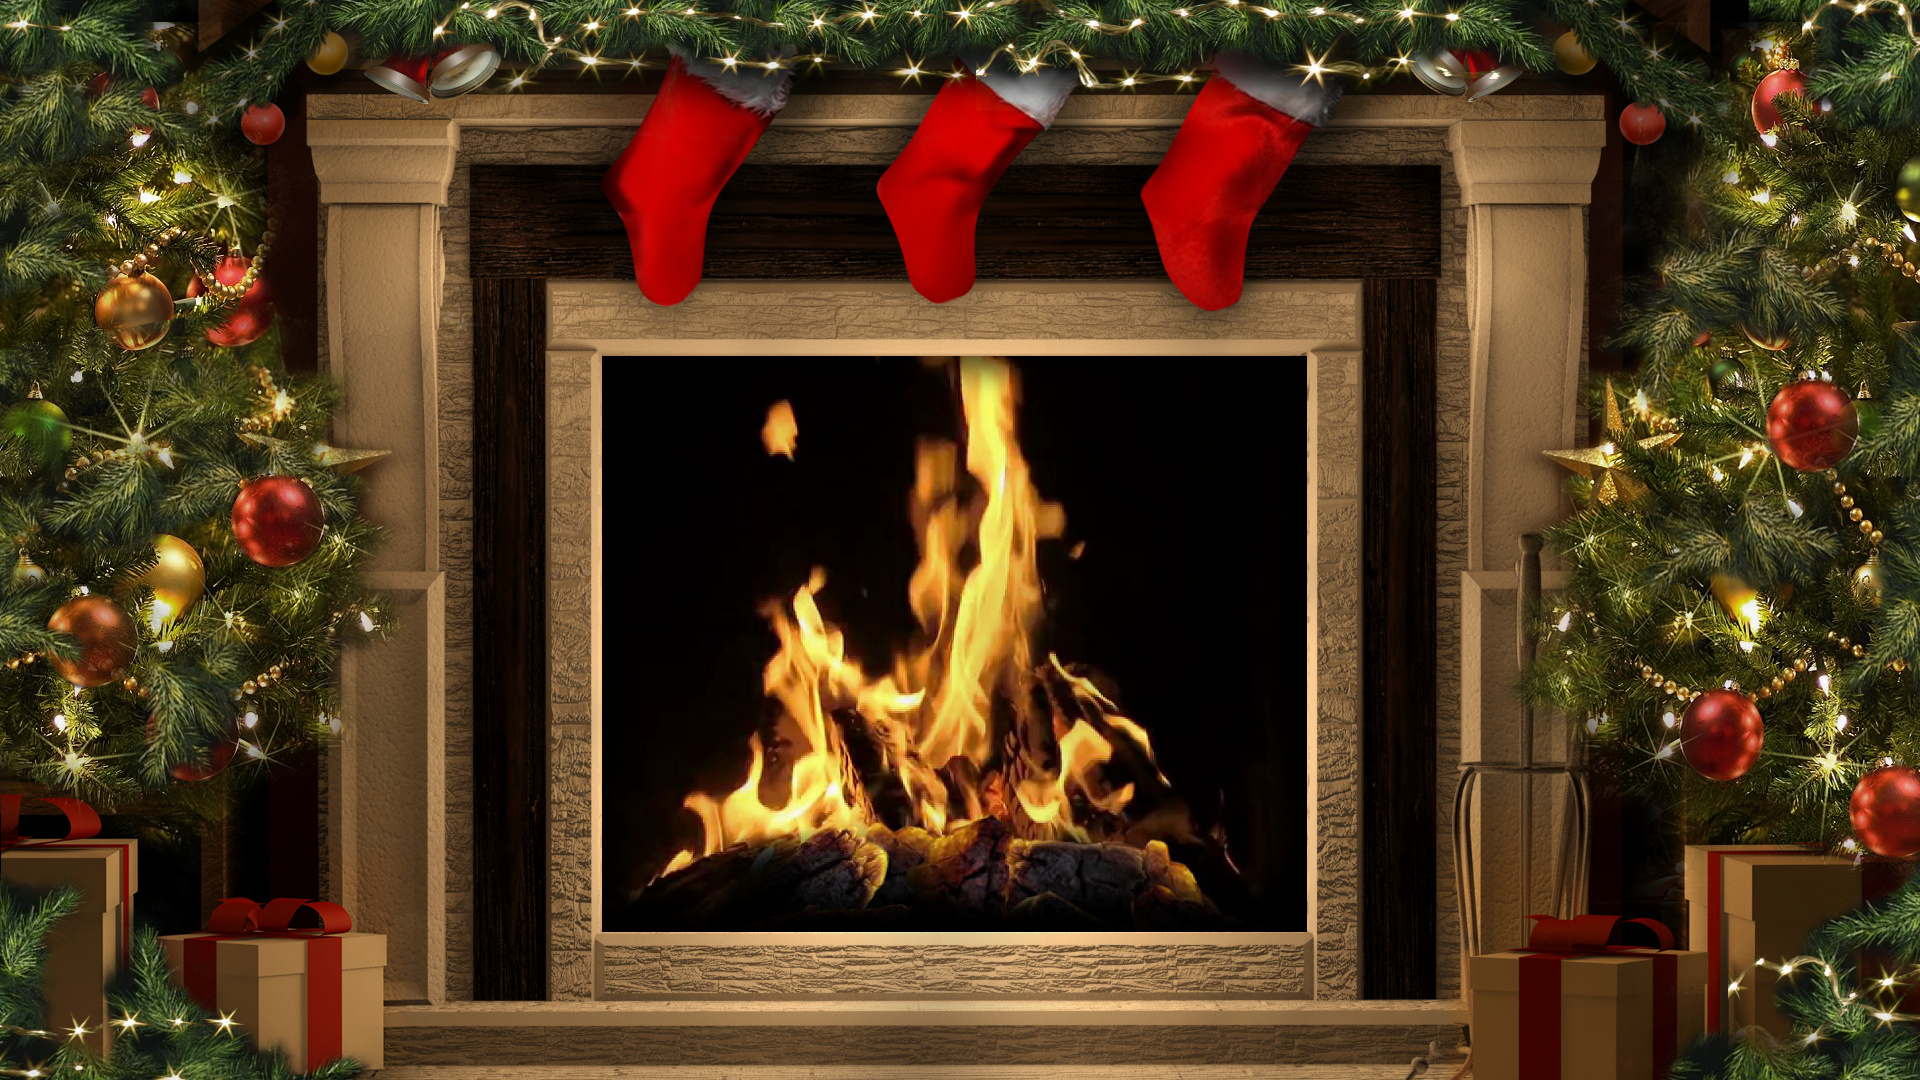 Amazing Christmas Fireplaces | Apps | 148Apps